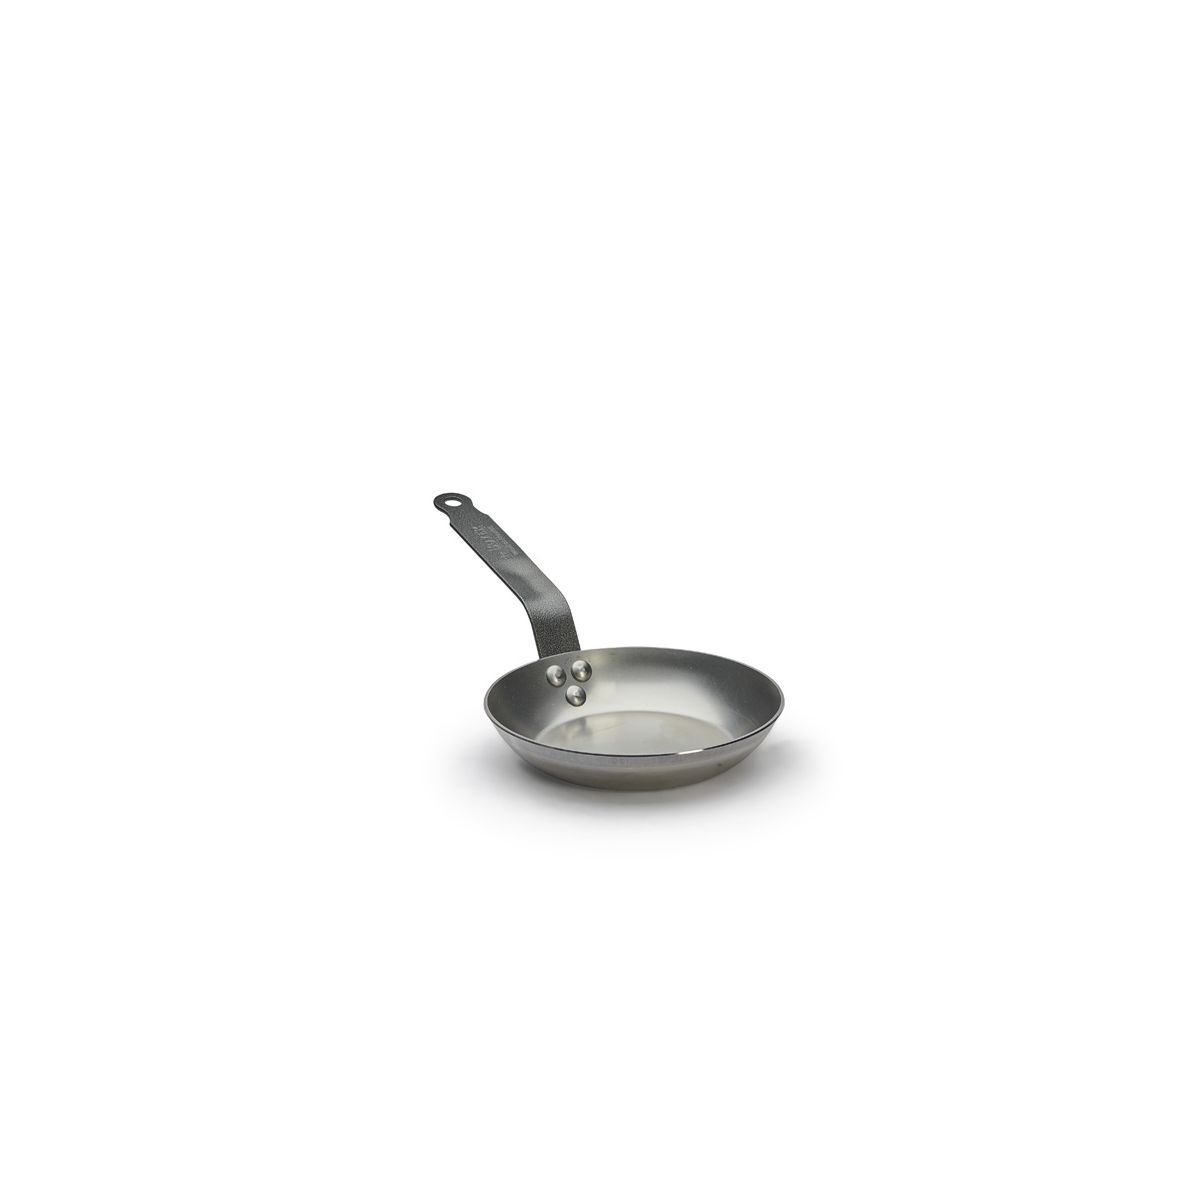  De Buyer 5130.28 Carbone Plus Round Frying Pan with Stainless  Steel Cold Handle, 28 cm Diameter: Home & Kitchen